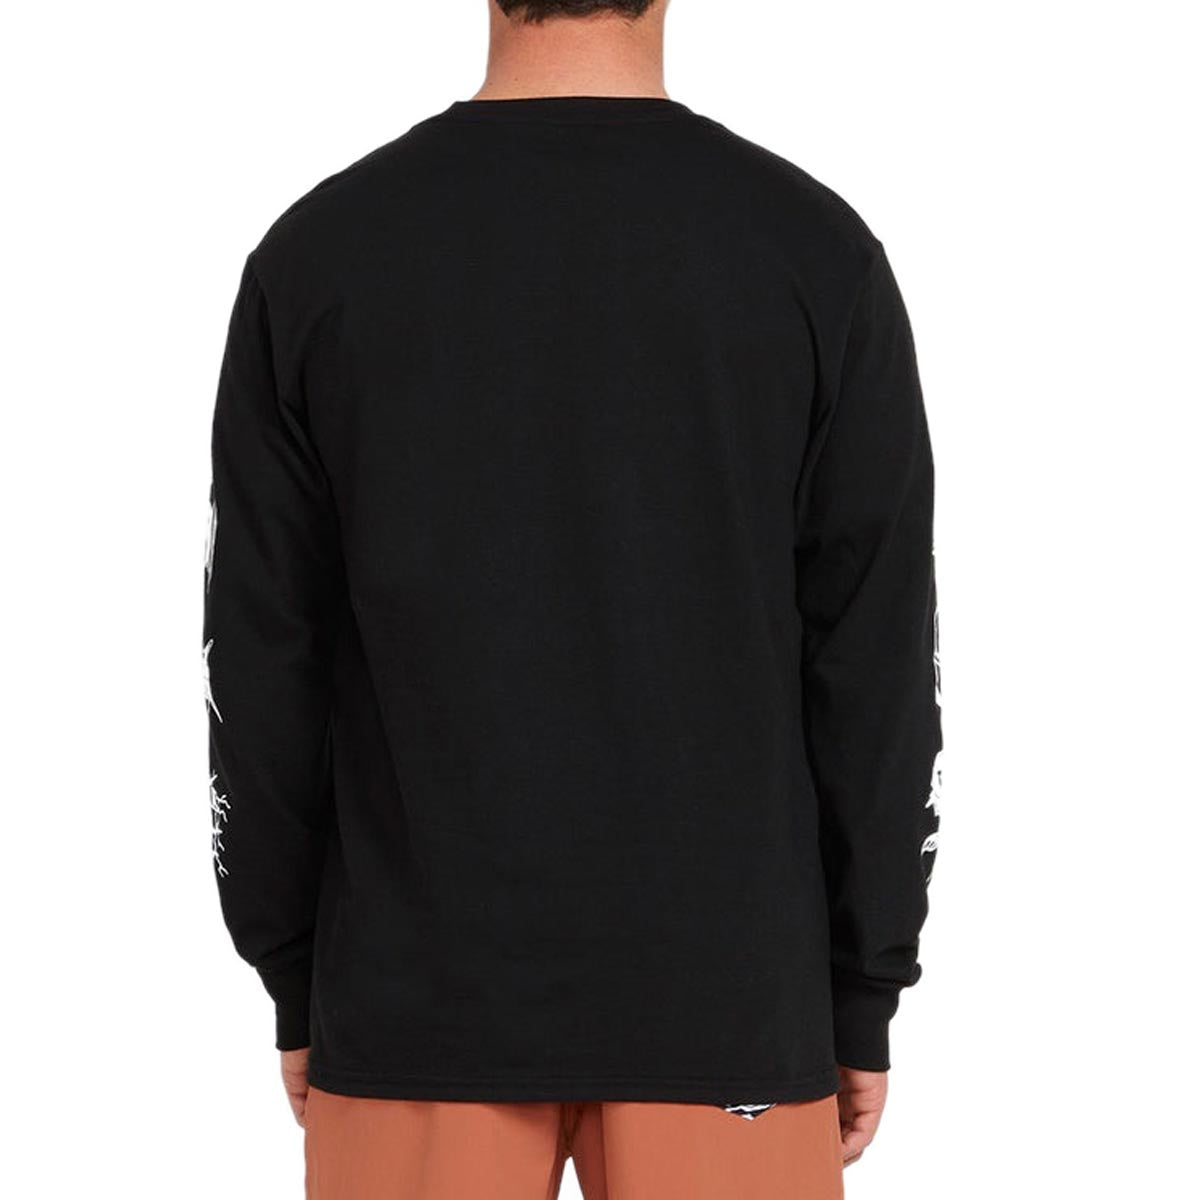 Volcom About Time Long Sleeve T-Shirt - Black image 2